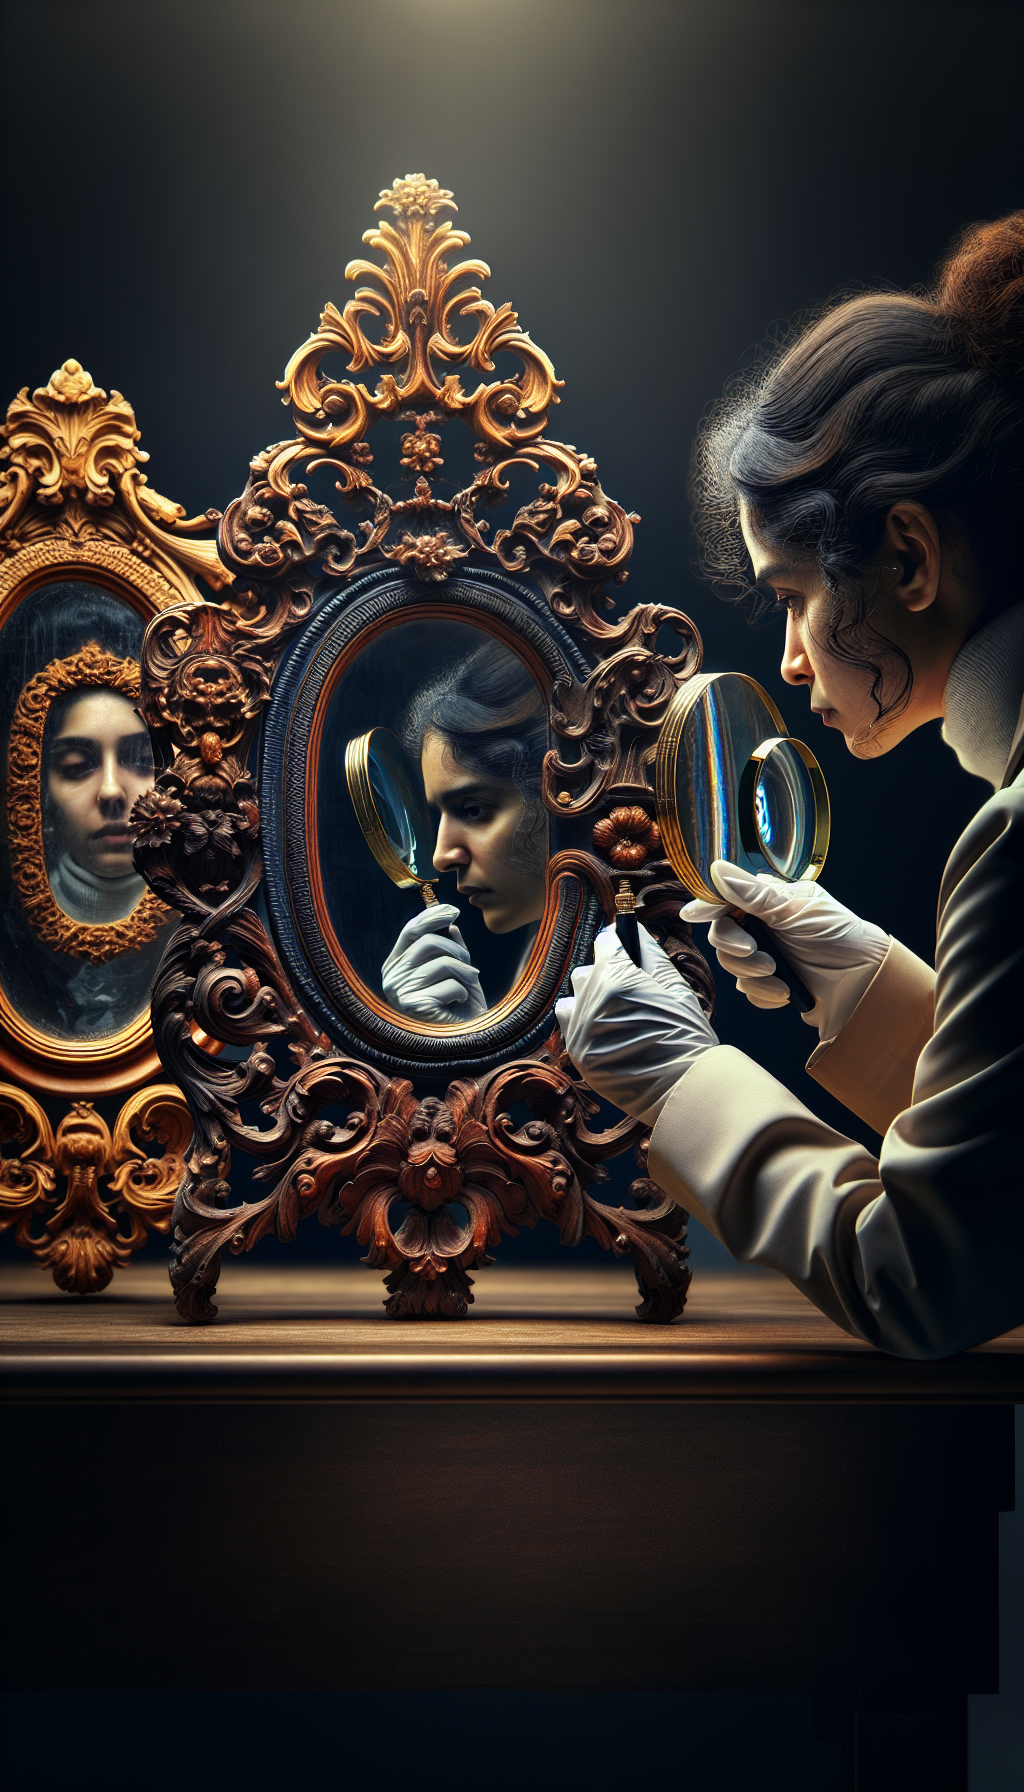 In the illustration, a figure of an appraiser with a magnifying glass is gazing intently at a beautifully ornate antique vanity mirror that reflects various states of itself in different styles—the Baroque, Victorian, and Art Nouveau. Each reflection also subtly transitions from pristine to patinated, symbolizing the valuation process based on craftsmanship and condition.